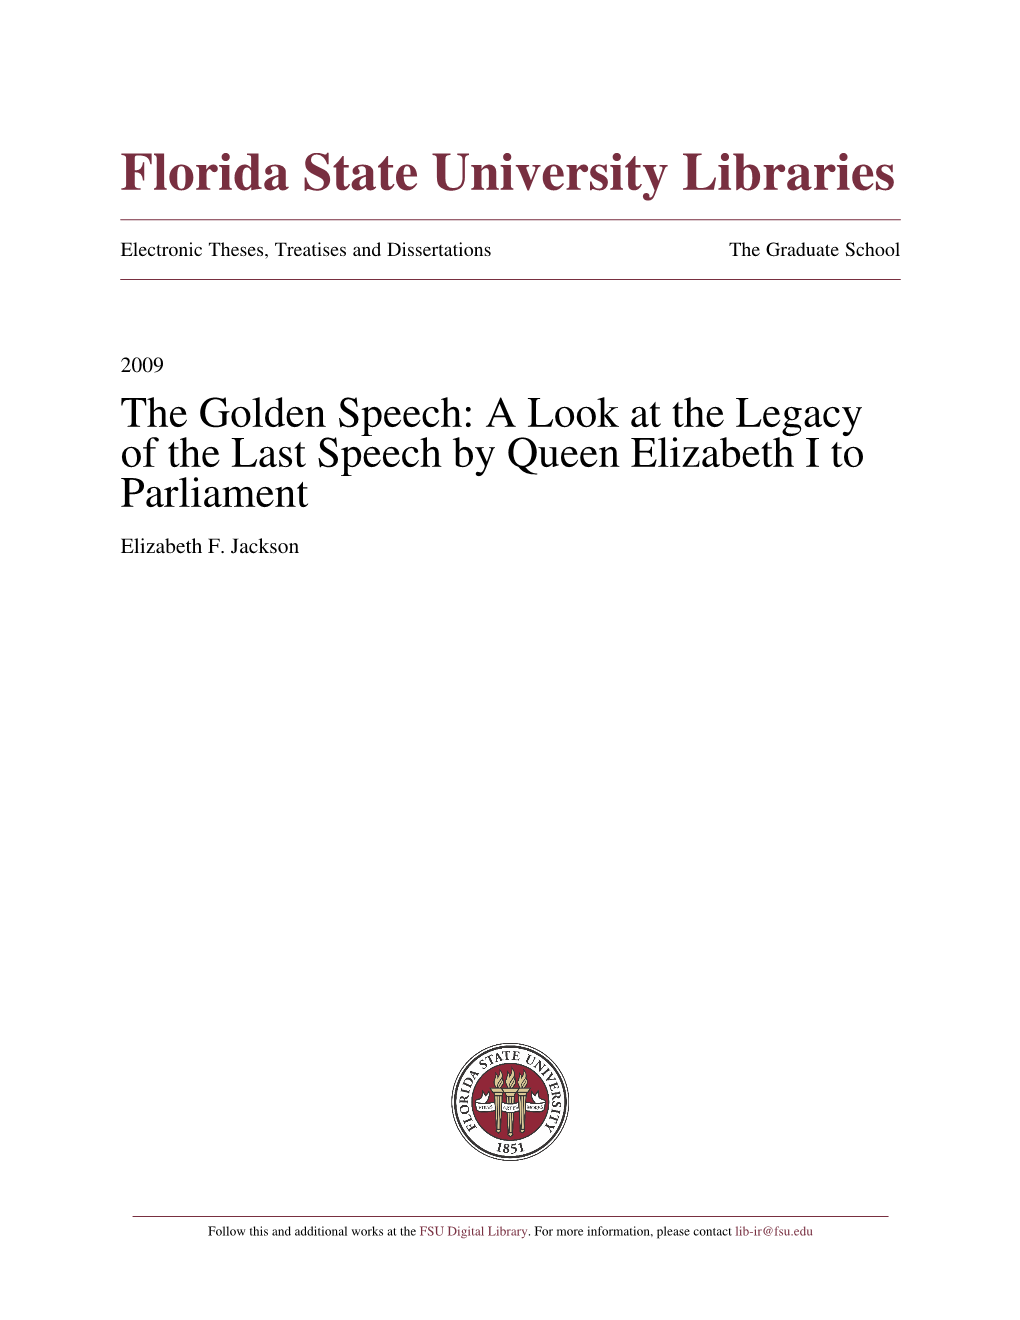 The Golden Speech: a Look at the Legacy of the Last Speech by Queen Elizabeth I to Parliament Elizabeth F